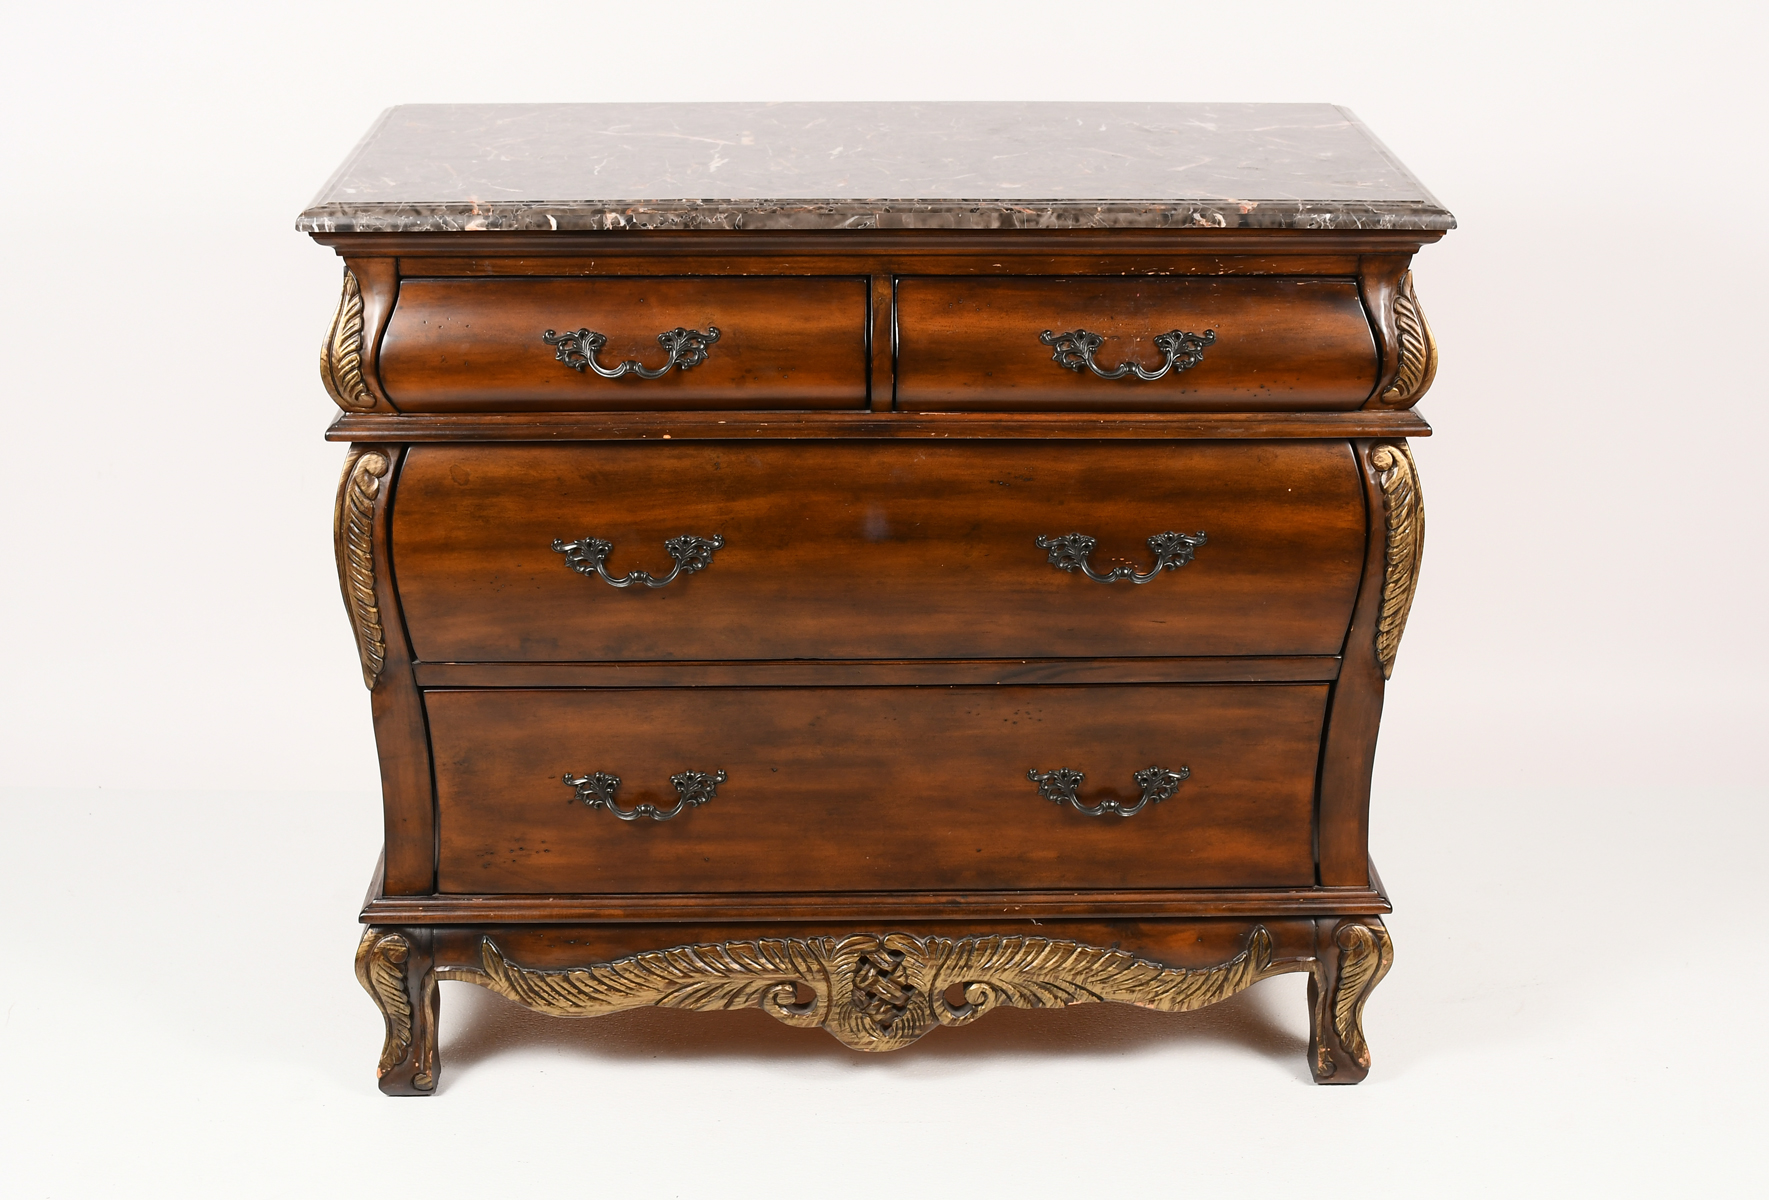 MARBLE TOP 4 DRAWER COMMODE A 2ed3da